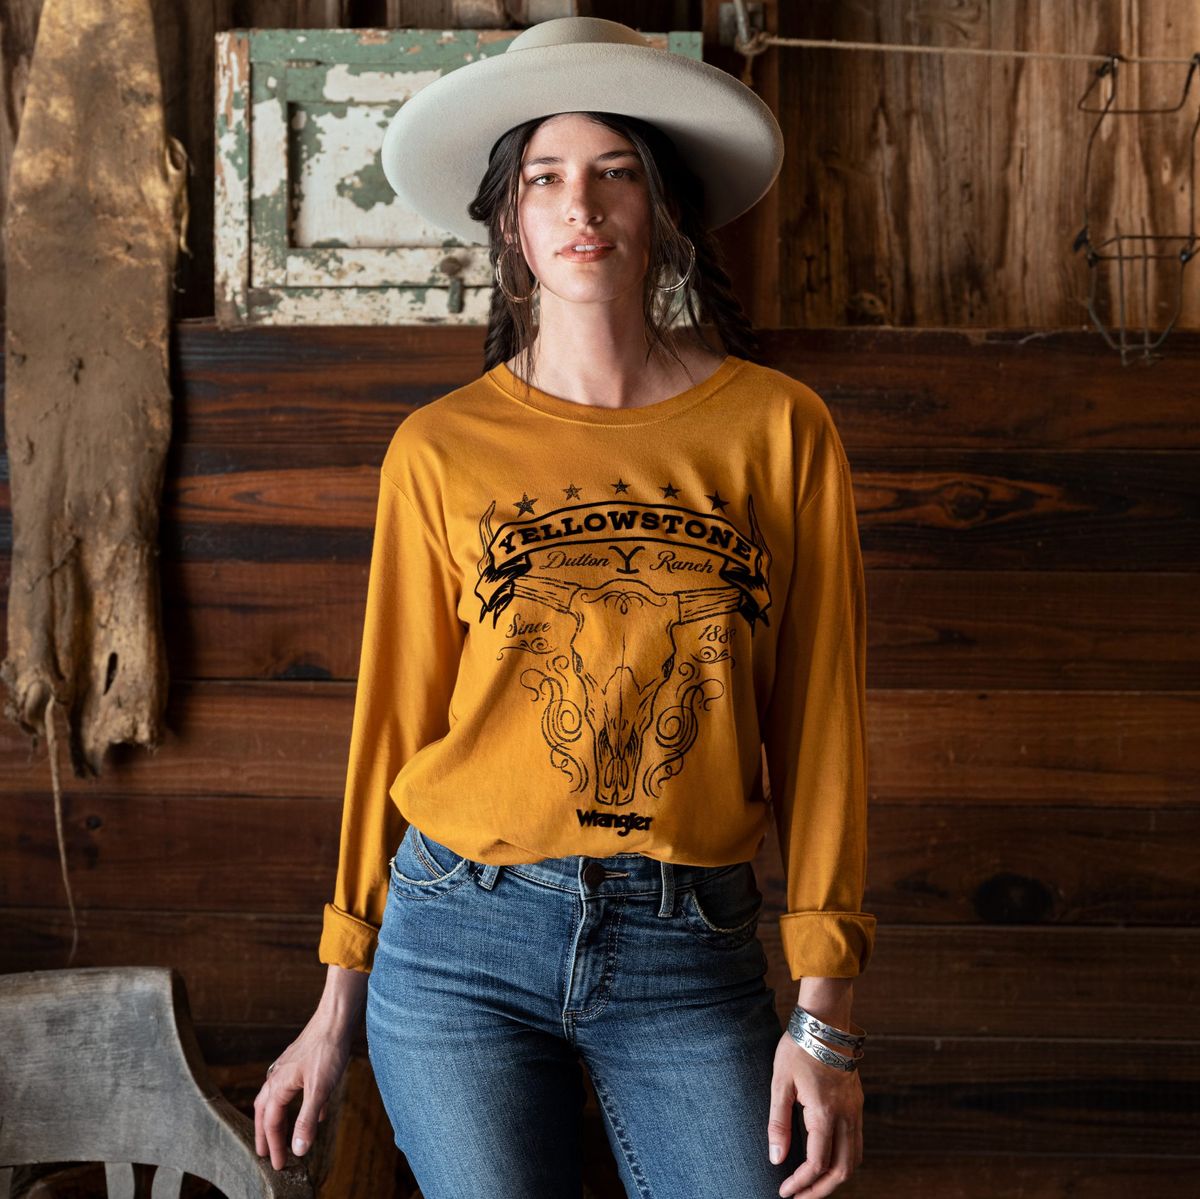 Wrangler Releases New 'Yellowstone' Clothing Collection